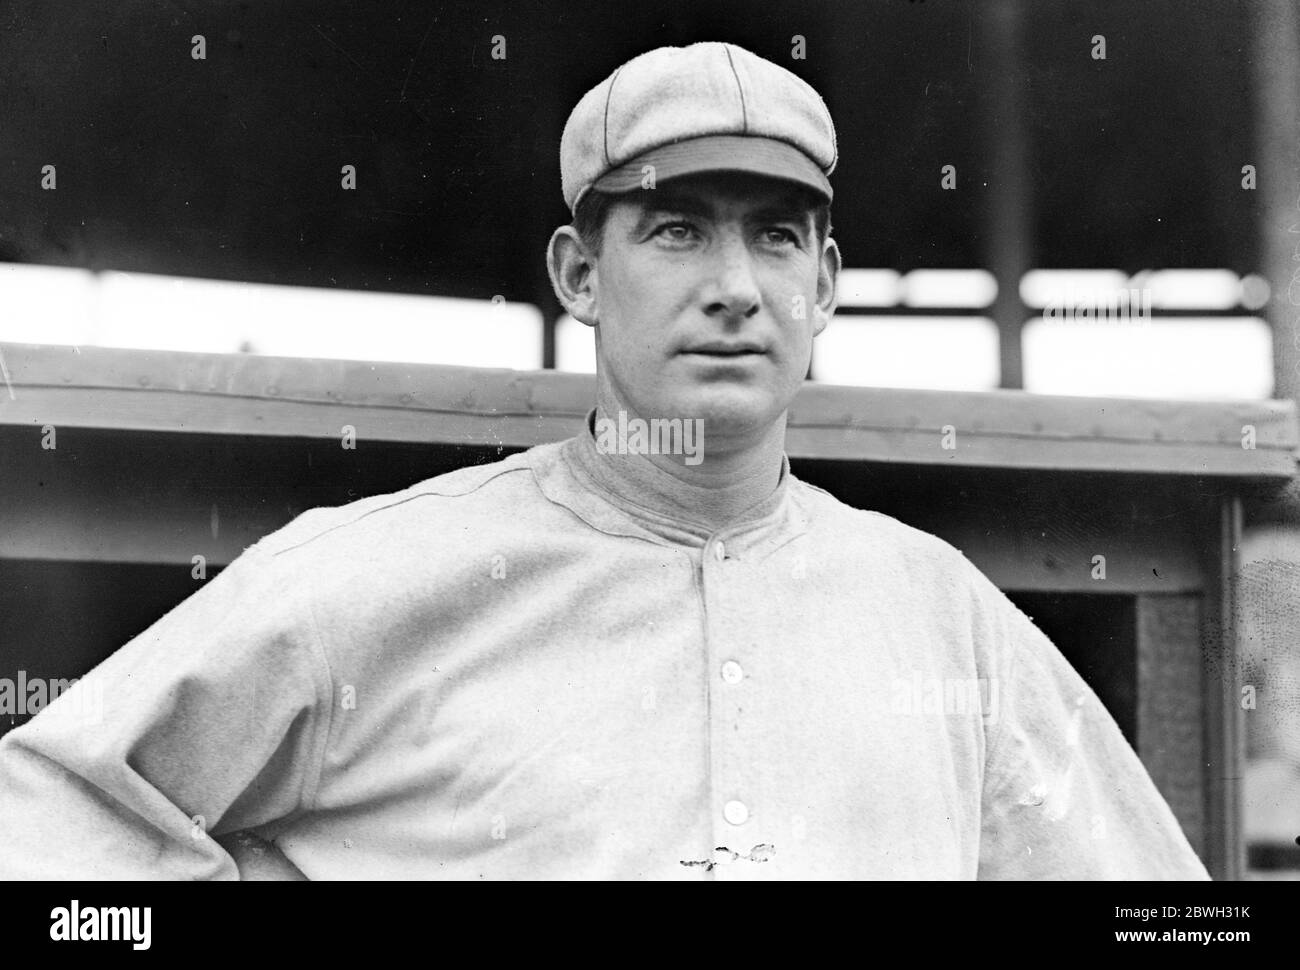 Roger Philip Bresnahan (1879 – 1944), nicknamed 'The Duke of Tralee', was an American player and manager in Major League Baseball (MLB) Stock Photo